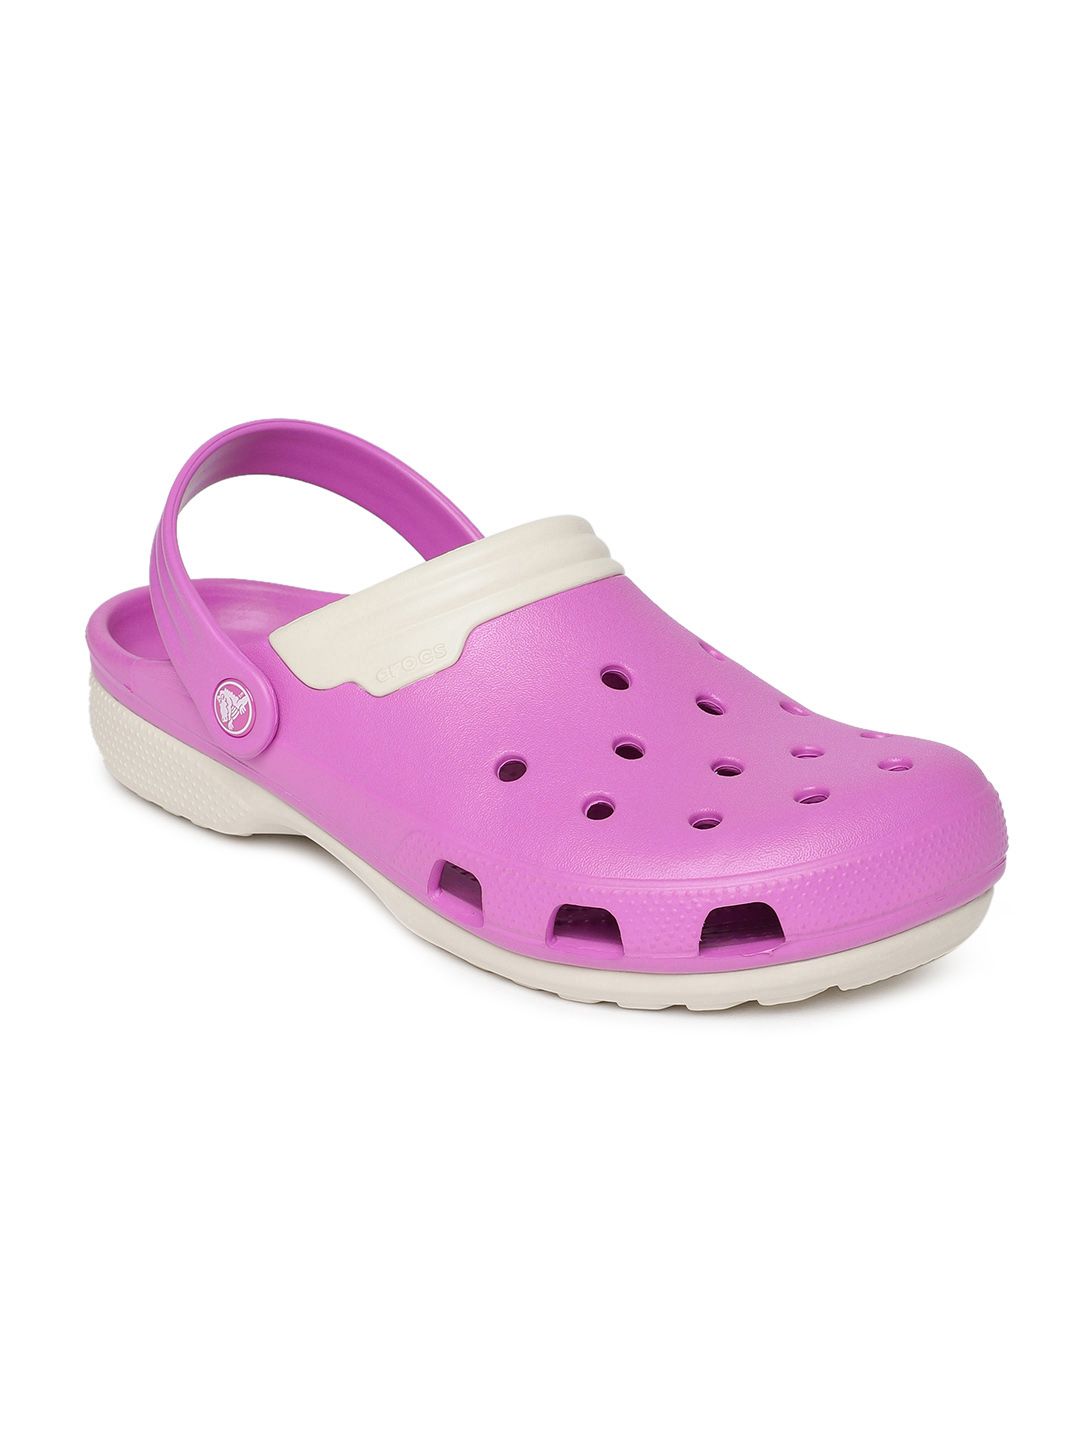 Crocs Unisex Pink Solid Clogs Price in India